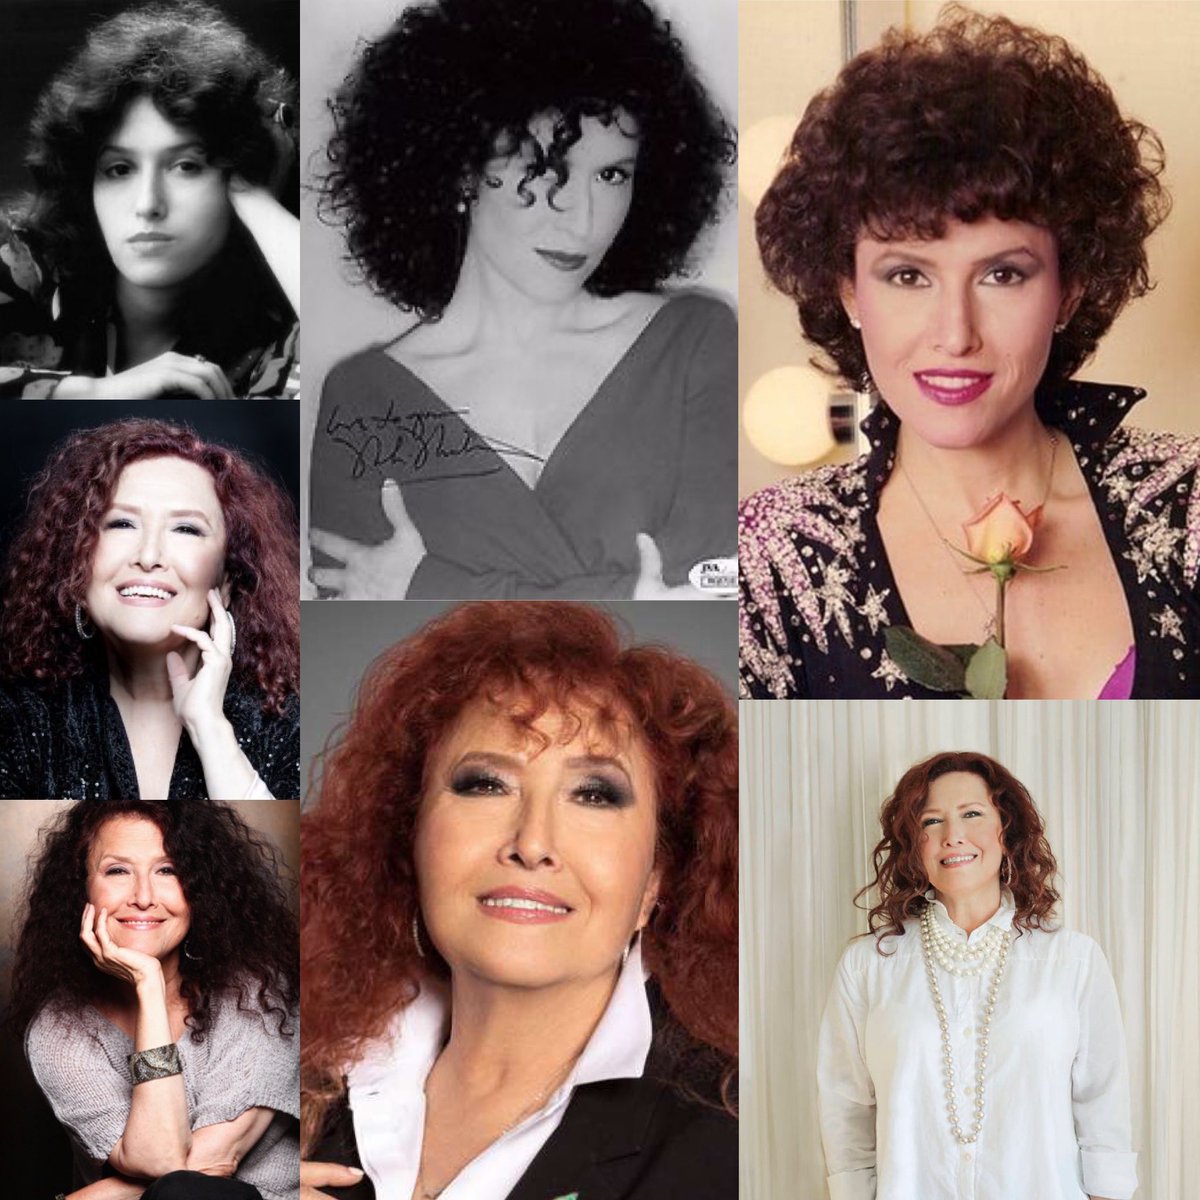 Hapoy 73rd Birthday! Melissa Manchester (born February 15, 1951)
#the80srule #the80s #80snostalgia #80sthrowback #retrorewind #happybirthday #melissamanchester